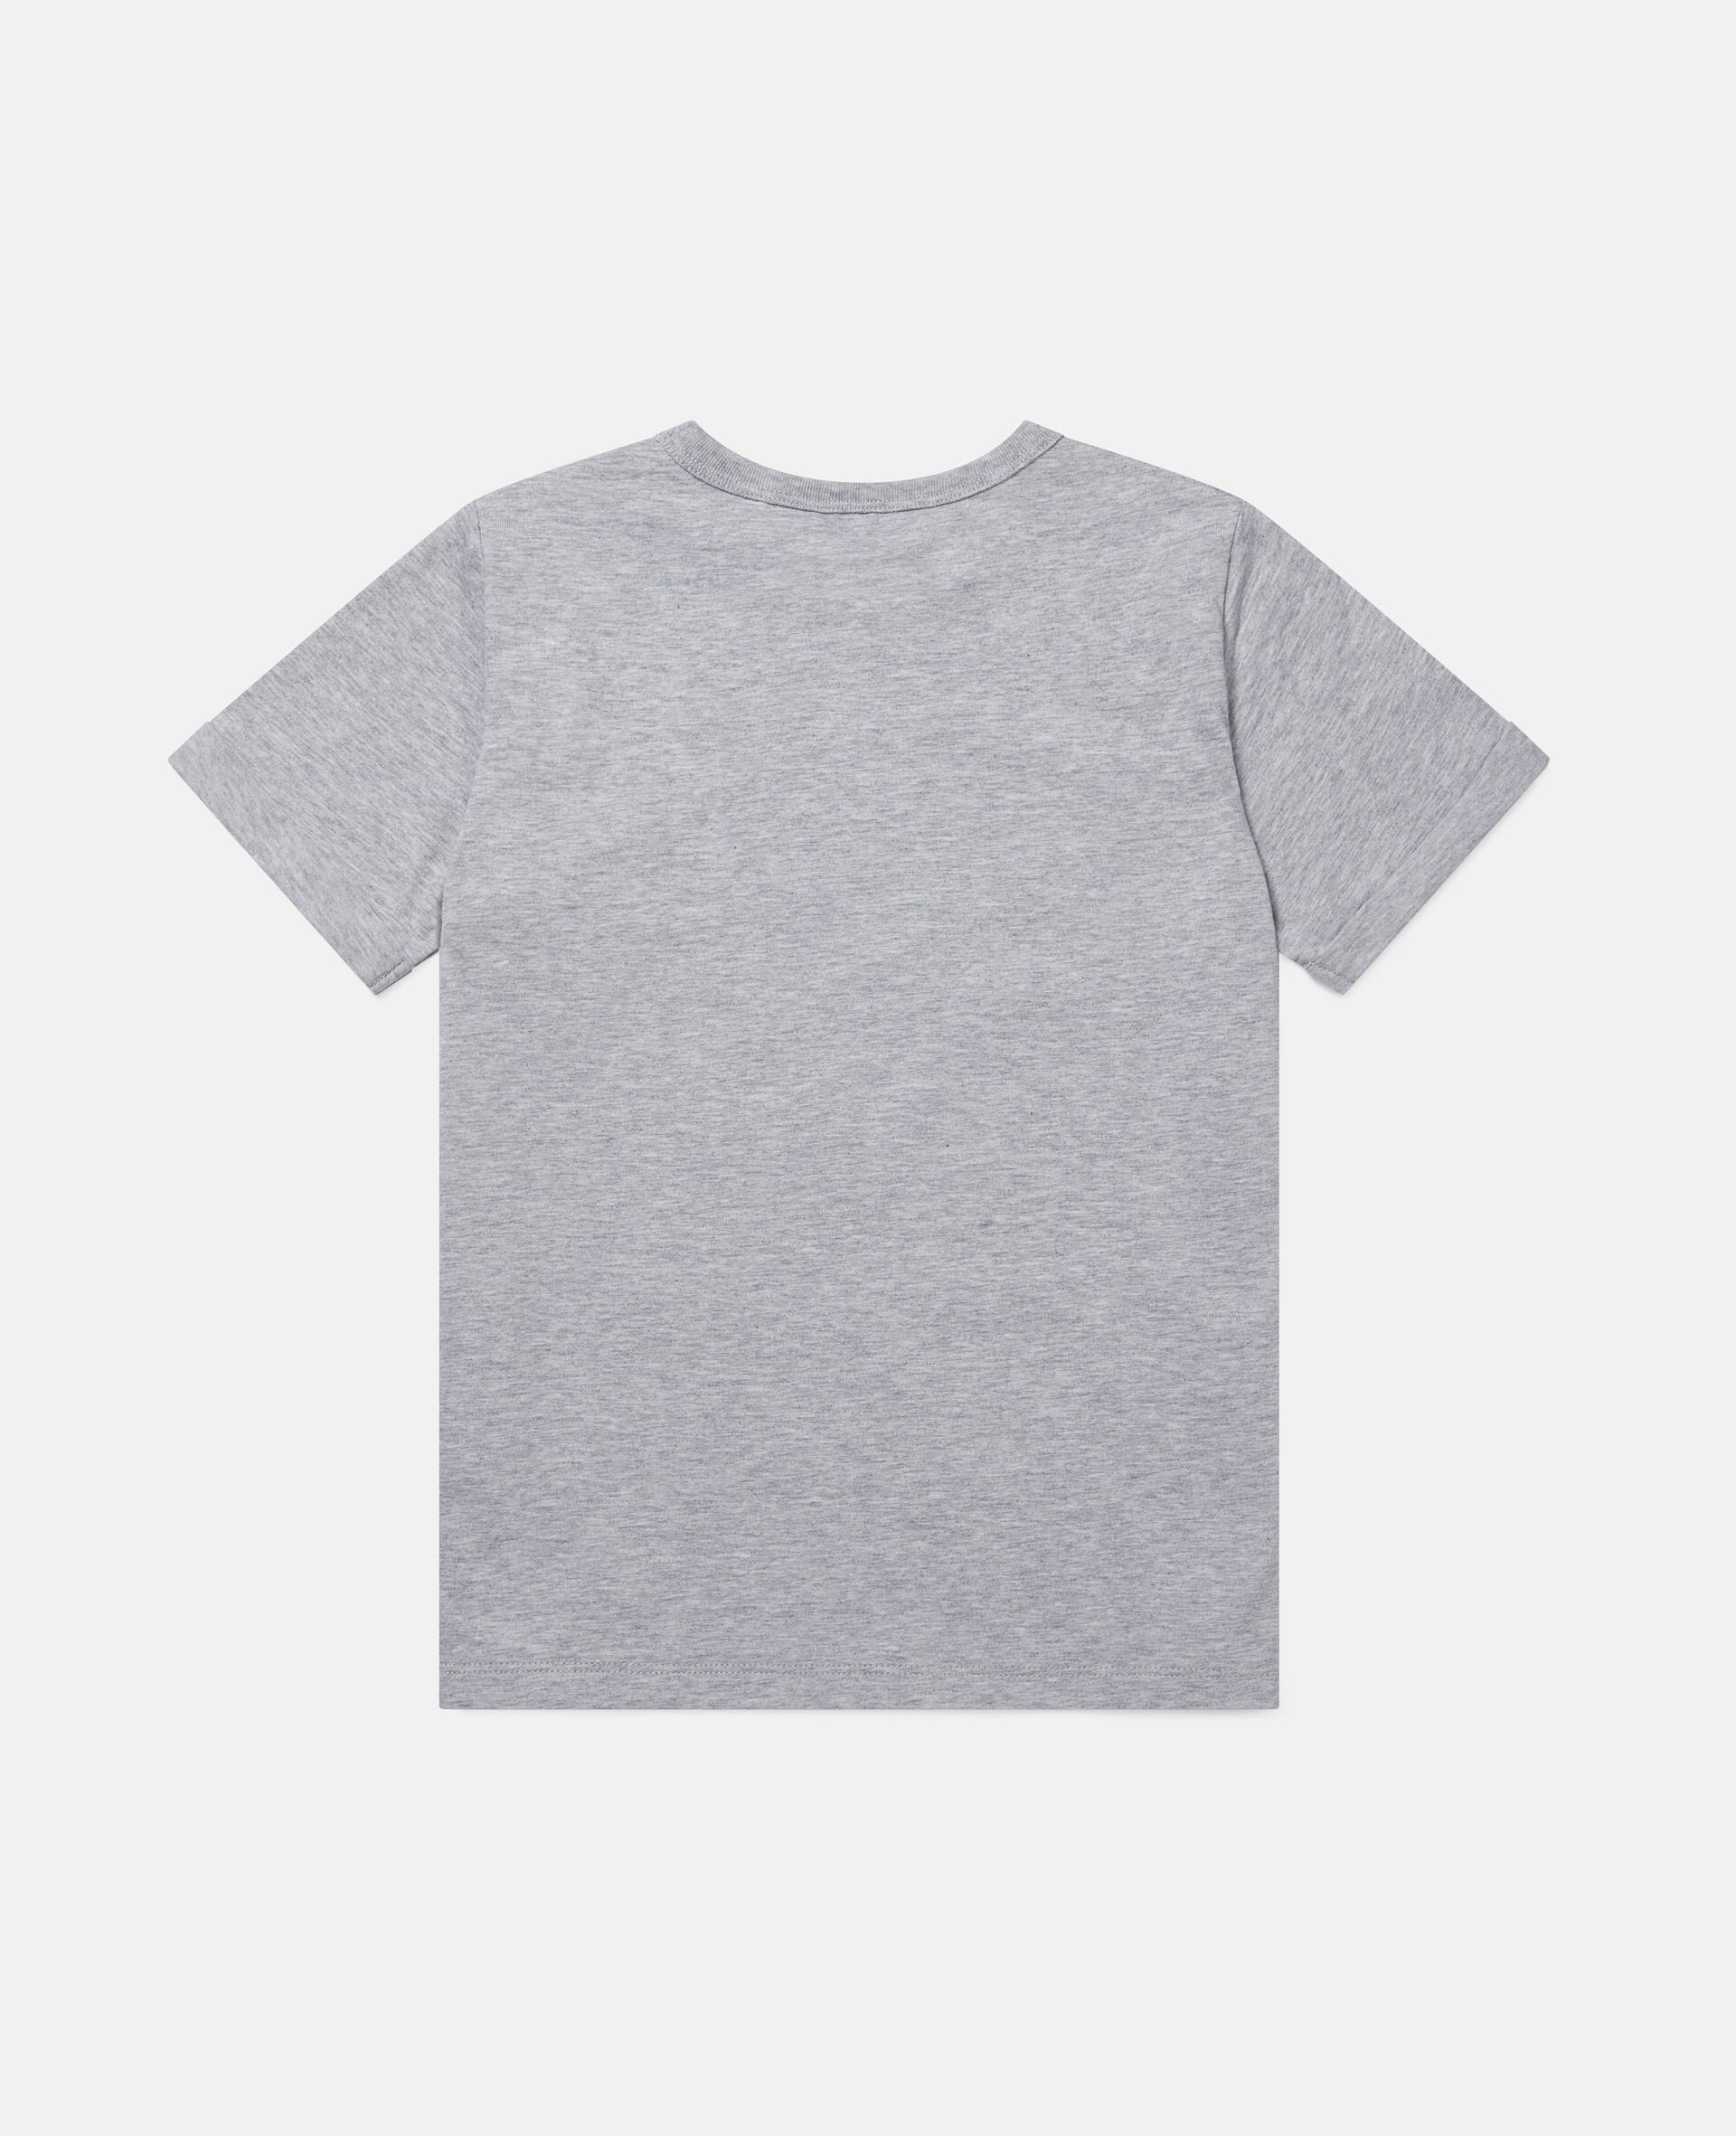 Daisy Heart Cotton T-Shirt-Grey-large image number 3